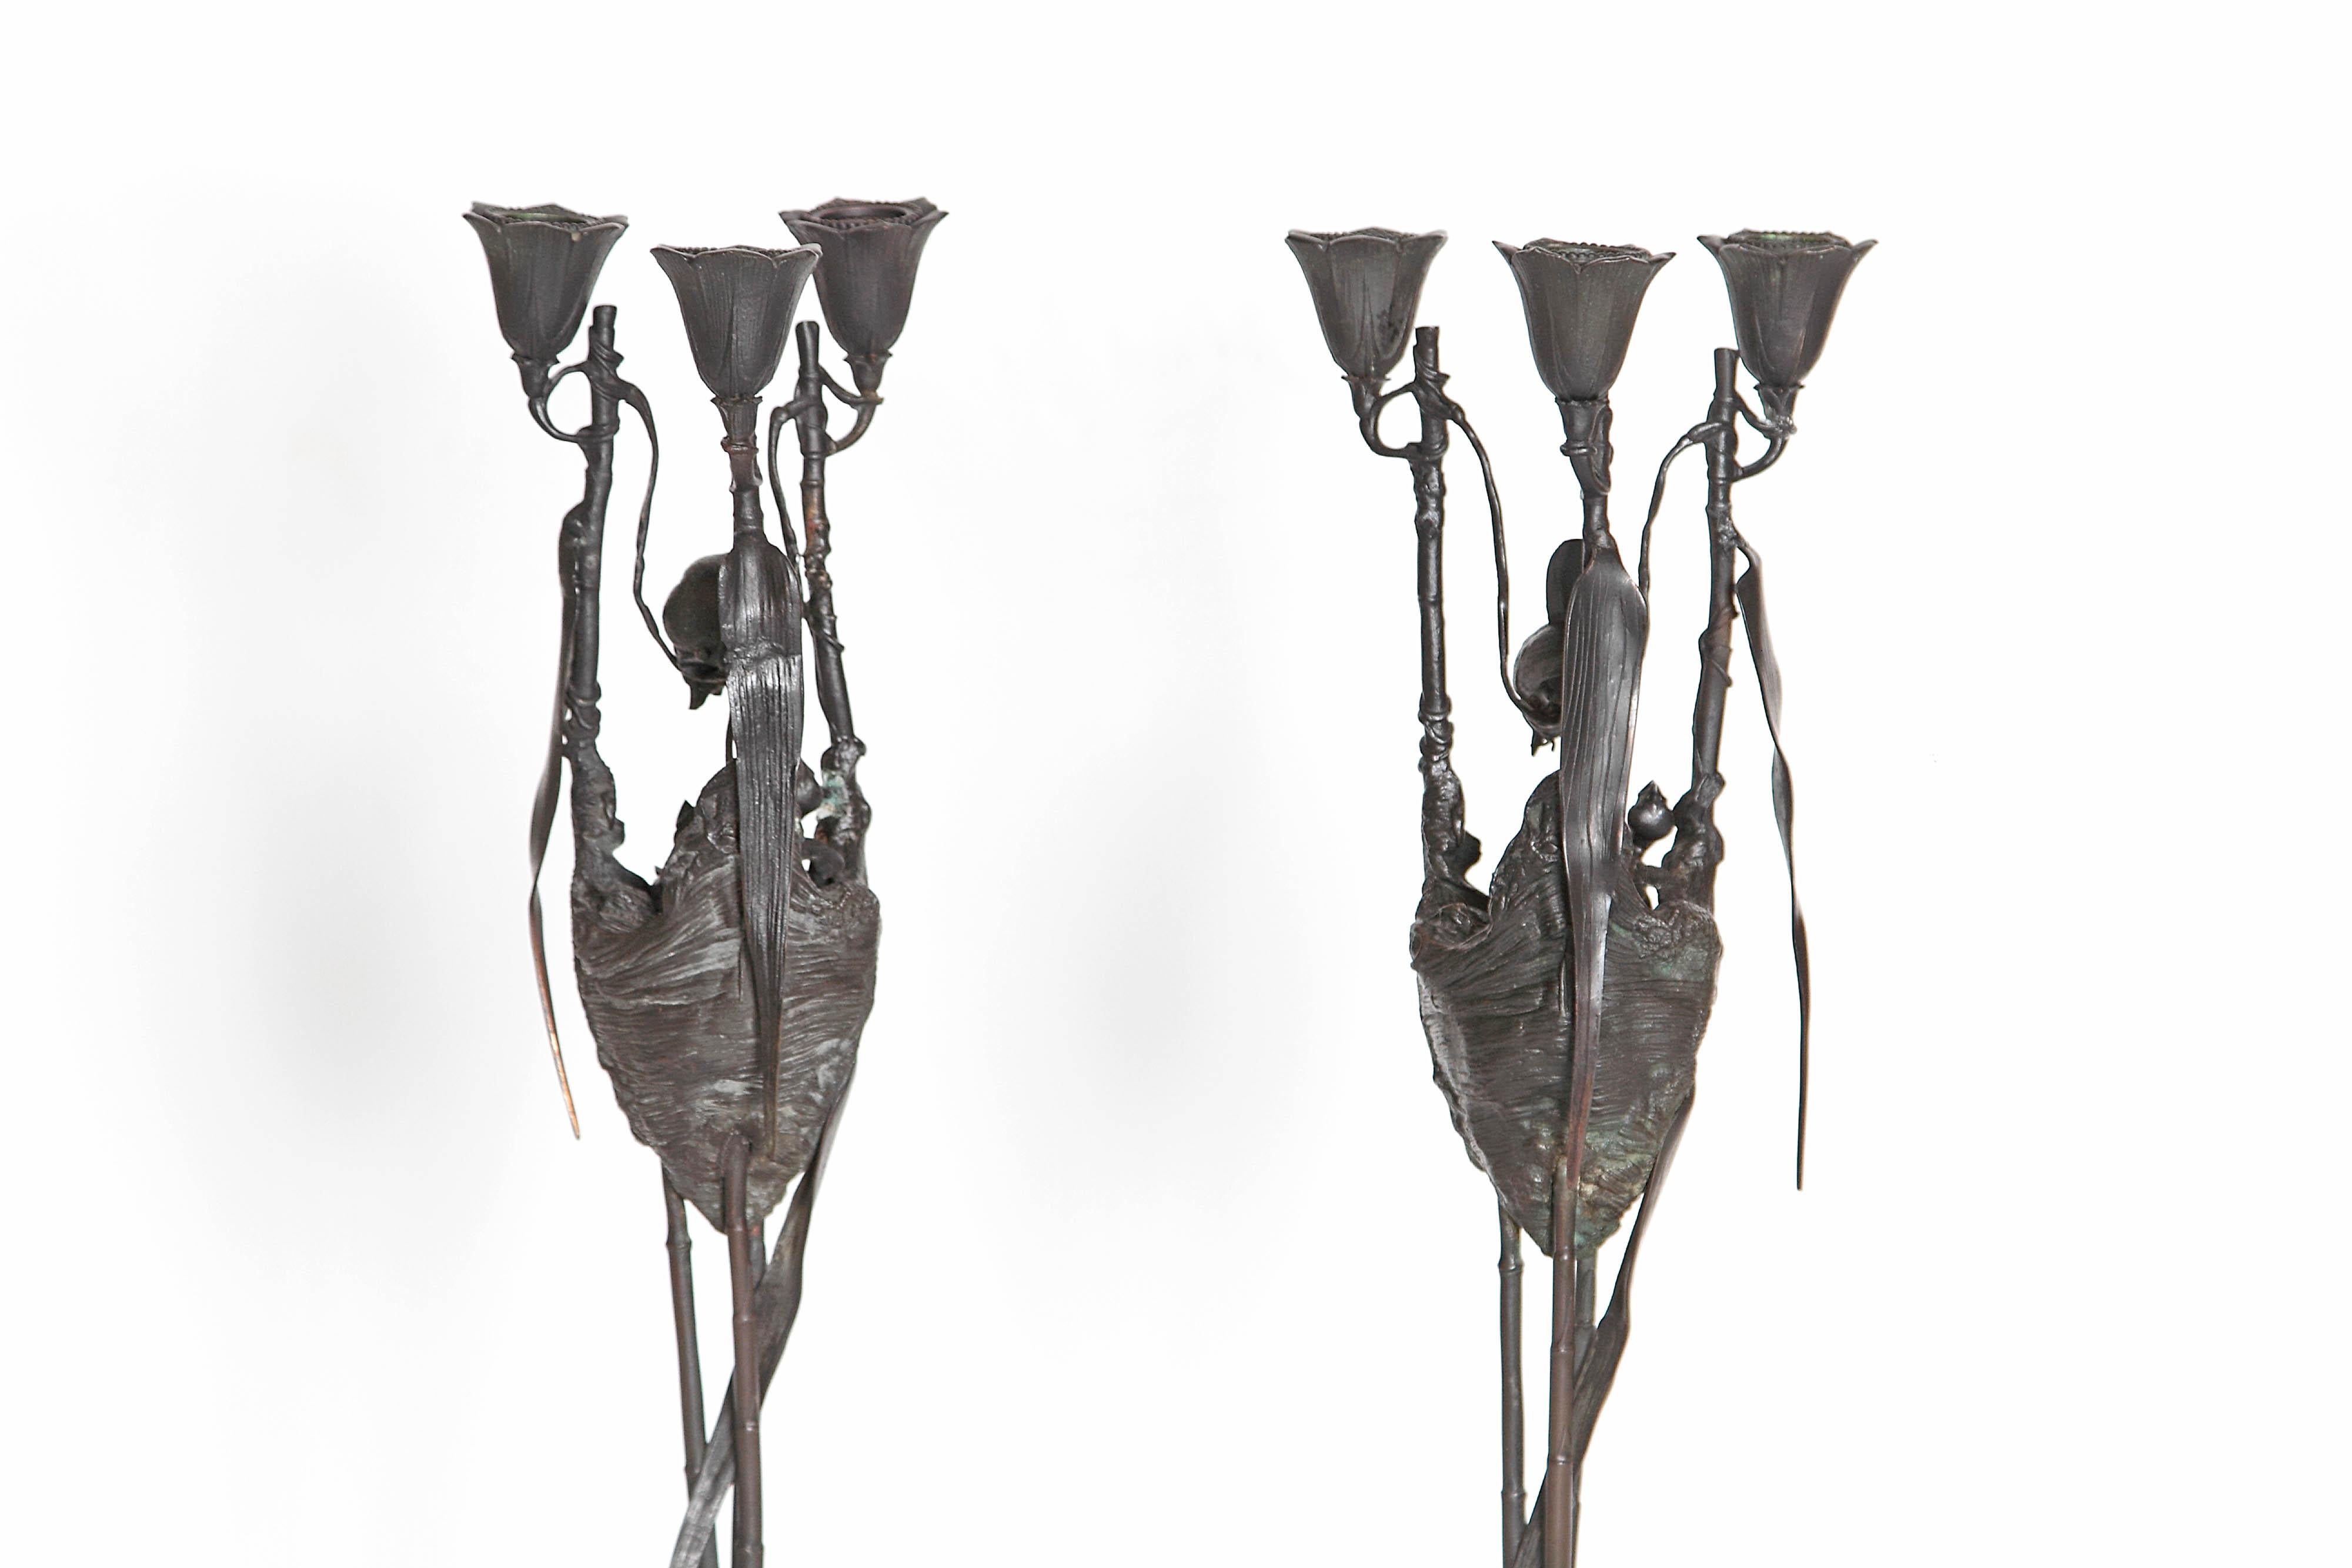 Auguste-Nicolas Cain, Pair of French Candelabra with Bird's Nest 3